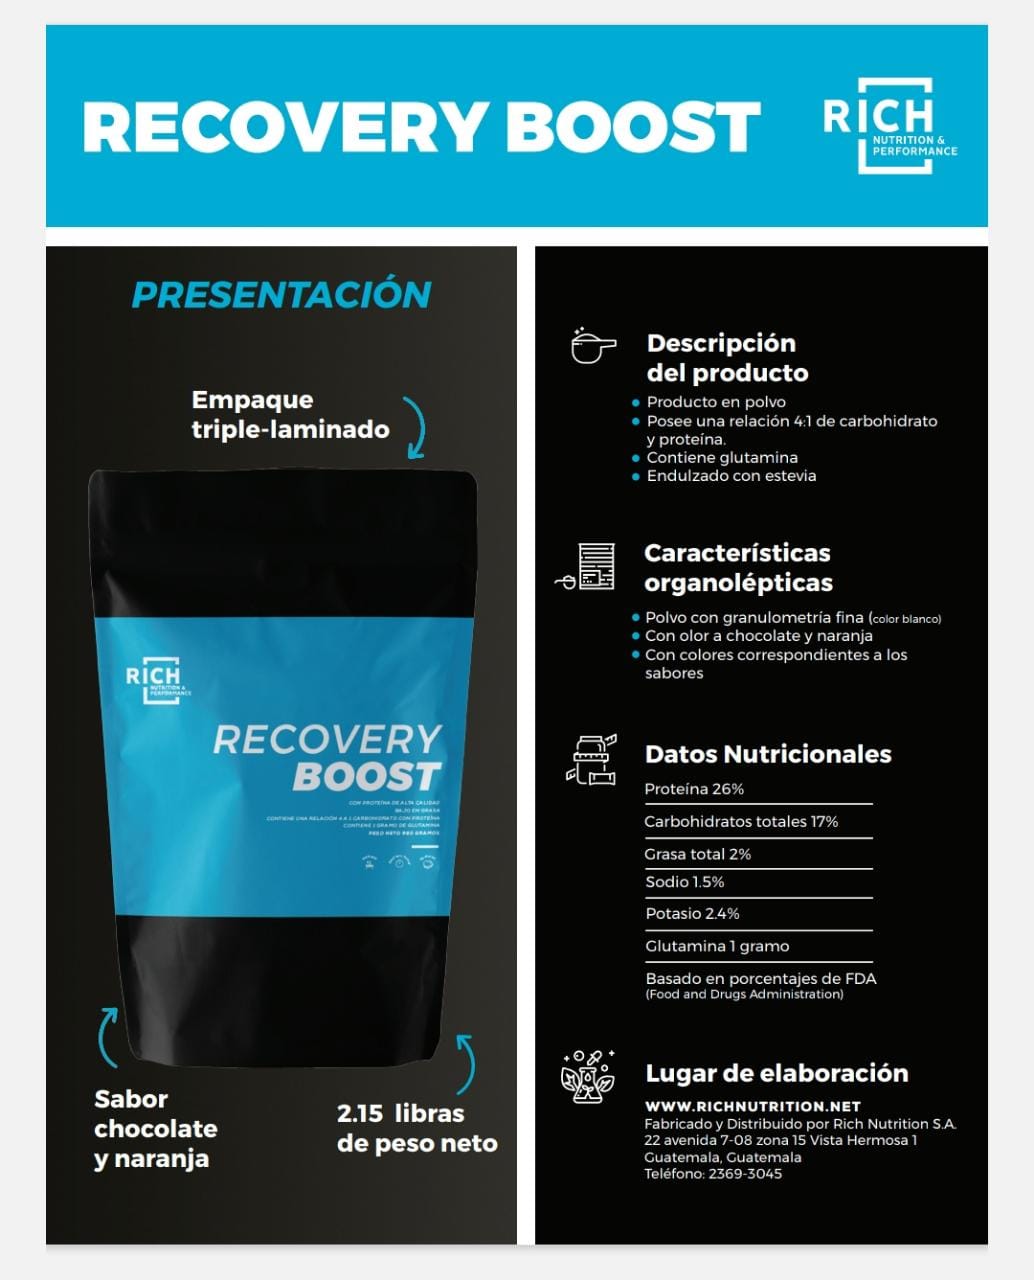 WHEY PROTEIN + GLUTAMINA RECOVERY BOOST RICH NUTRITION & PERFOMANCE 14 SERVIDAS 980 GRS.